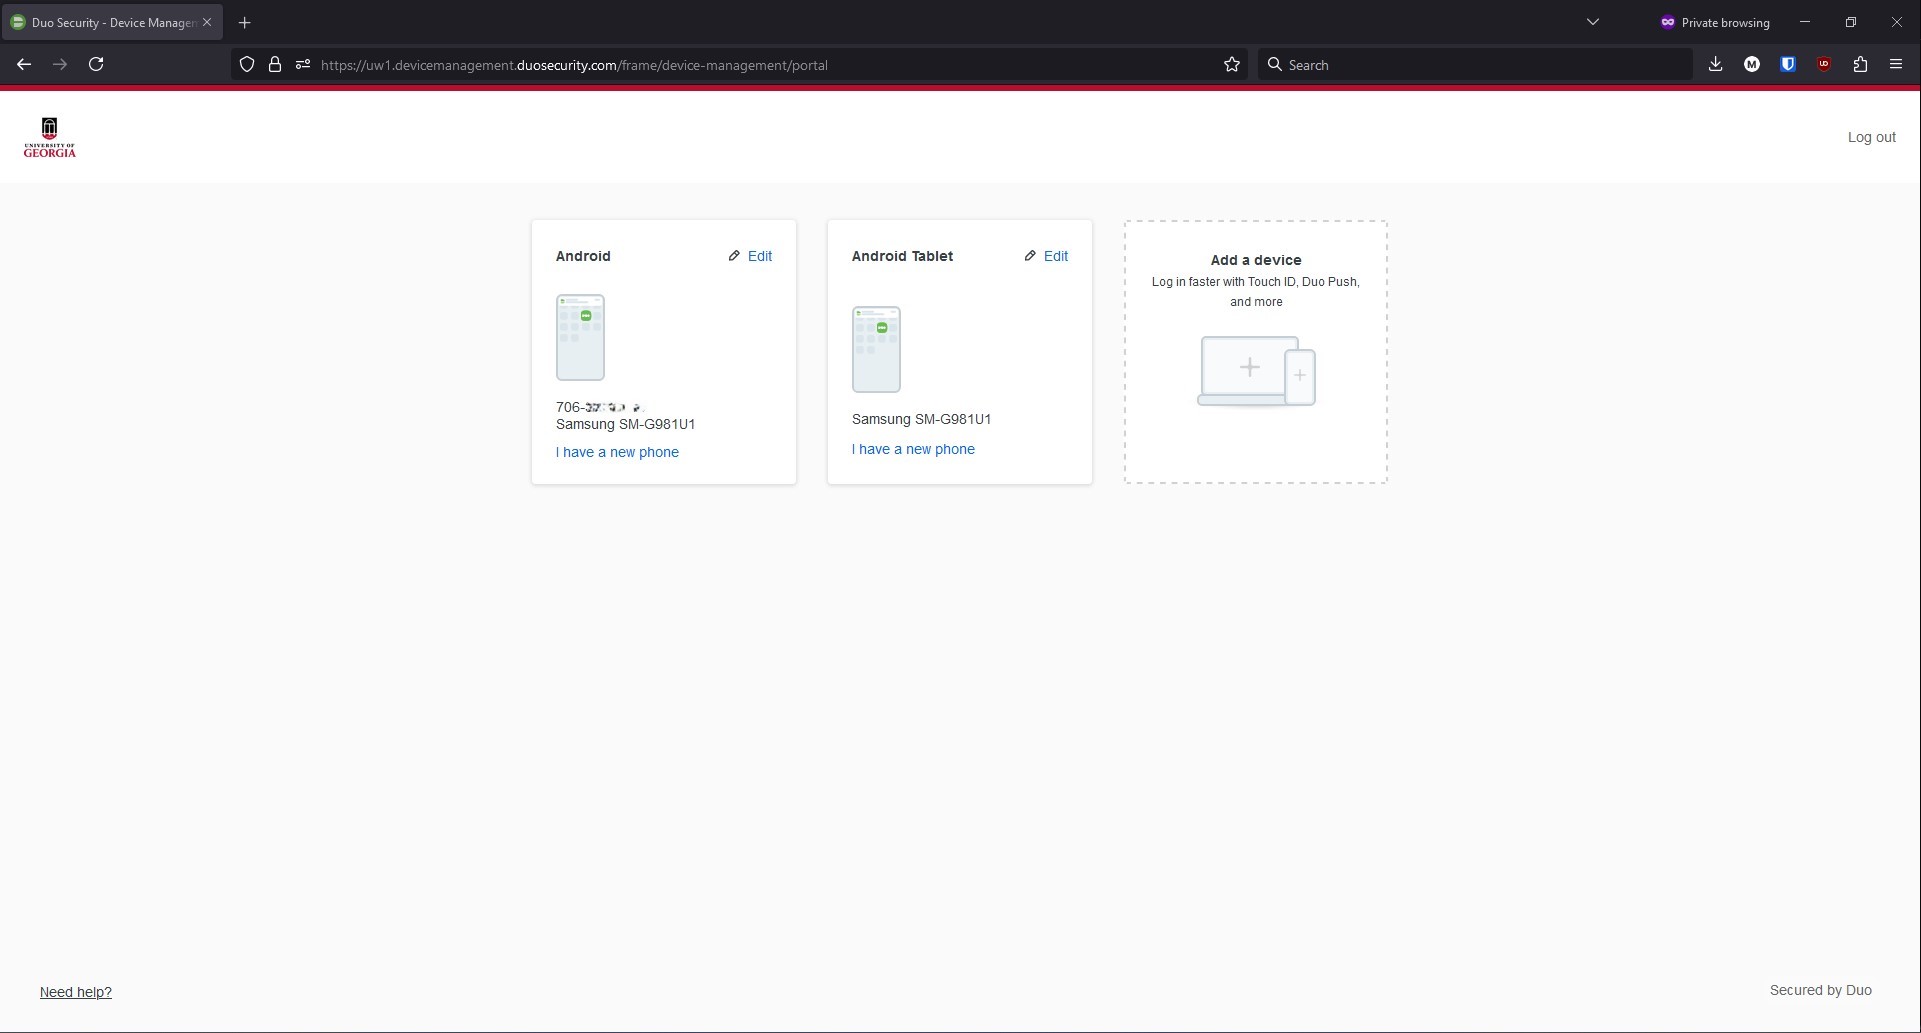 New device management portal in Duo